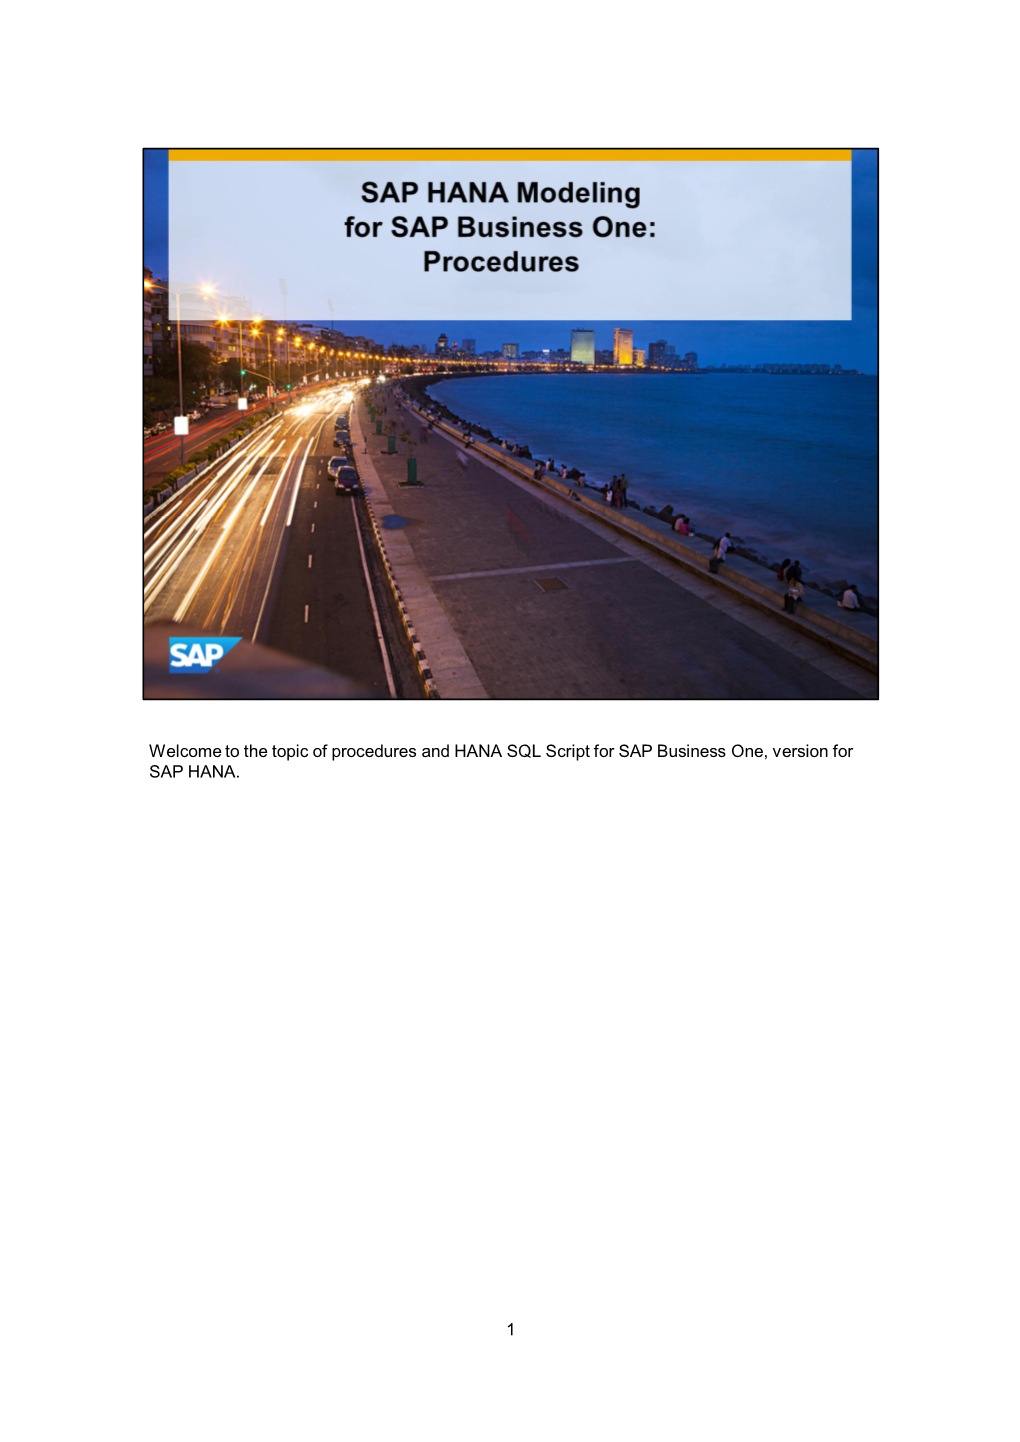 The Topic of Procedures and HANA SQL Script for SAP Business One, Version for SAP HANA